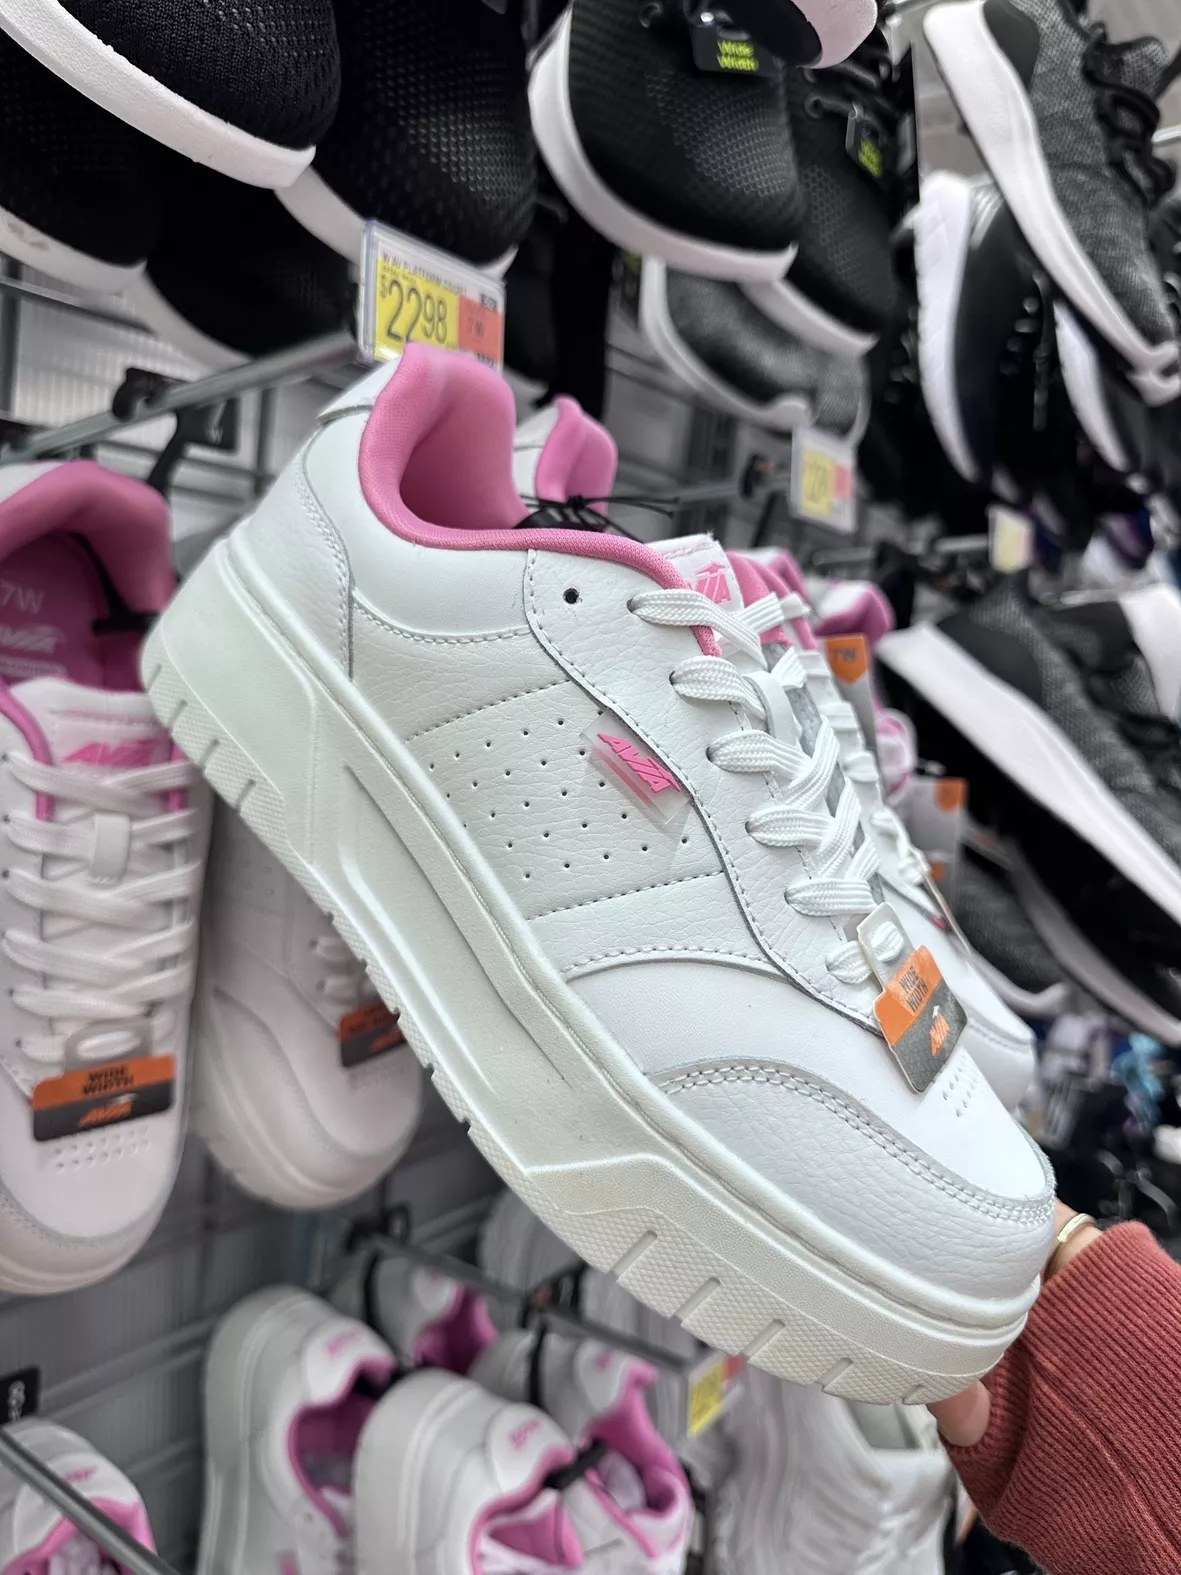 Walmart's viral Avia sneakers are finally back in stock and only